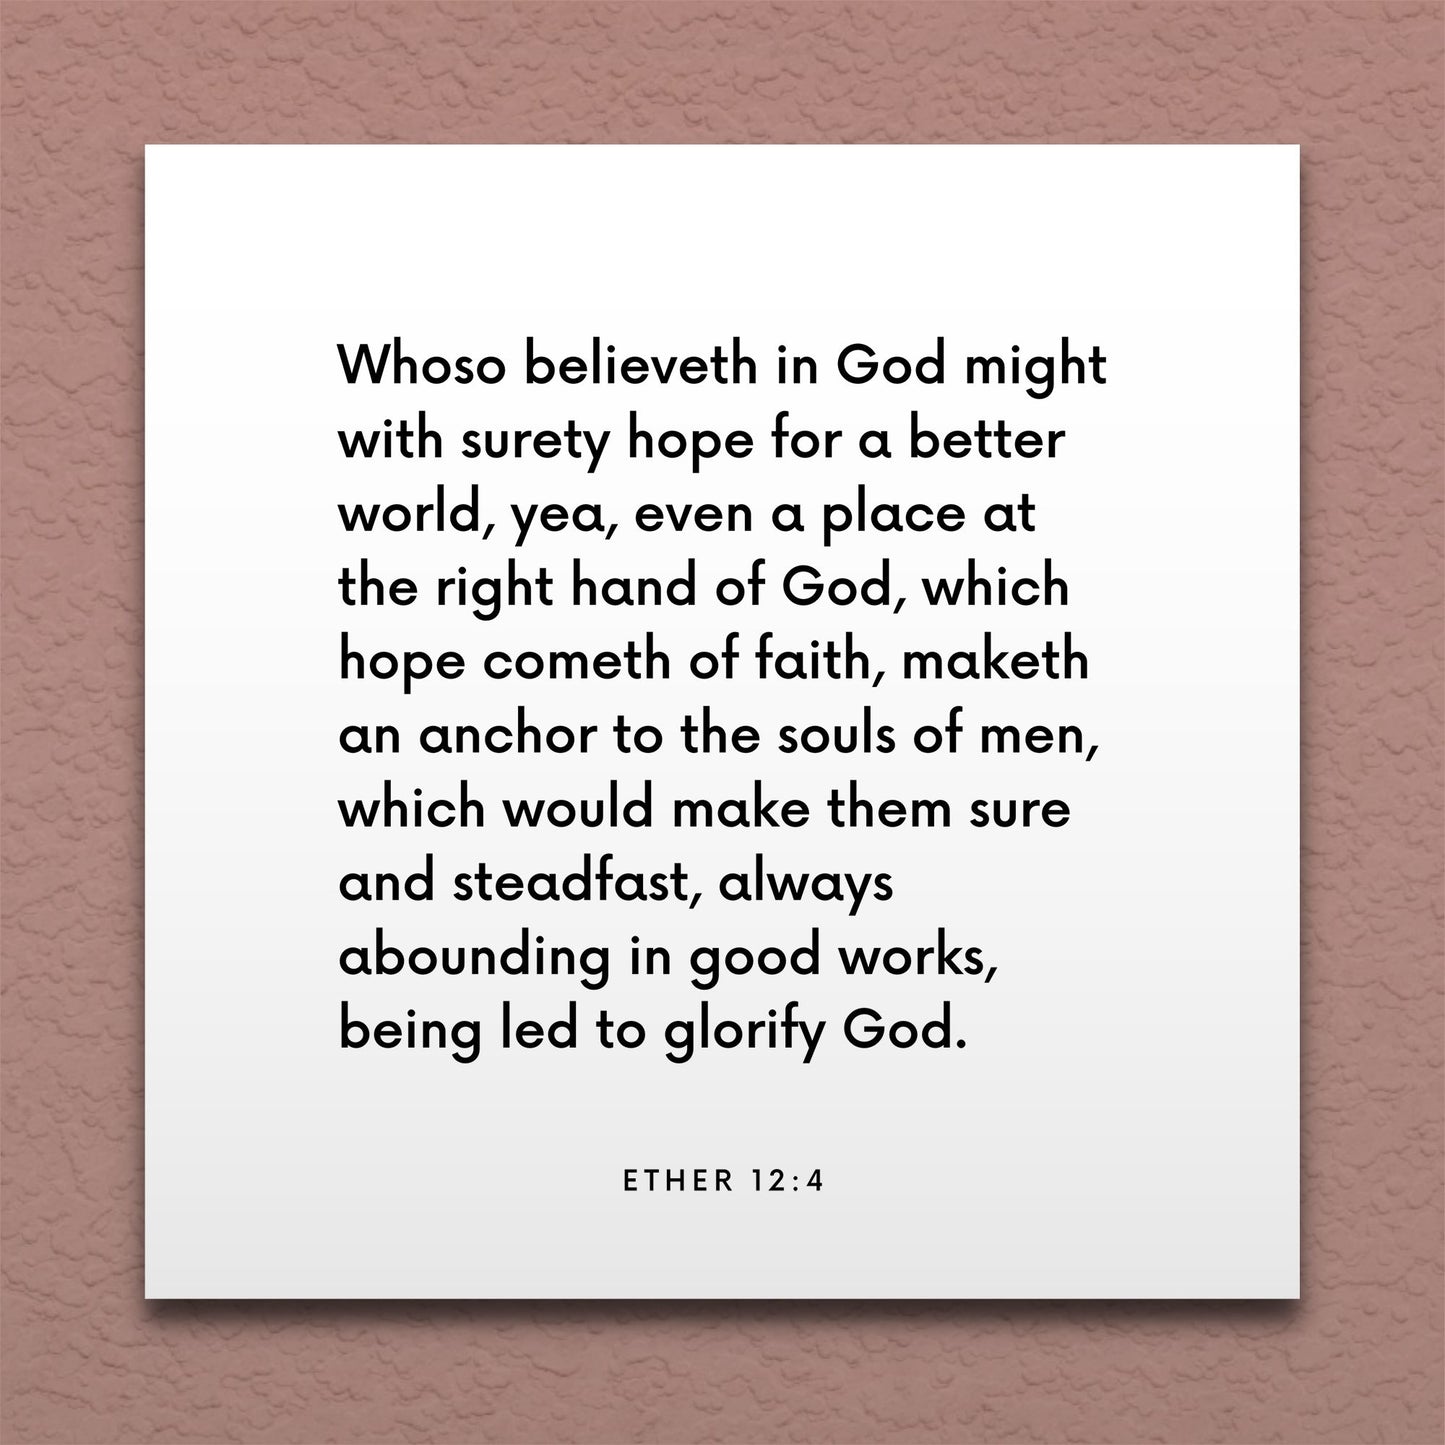 Wall-mounted scripture tile for Ether 12:4 - "Whoso believeth might with surety hope for a better world"